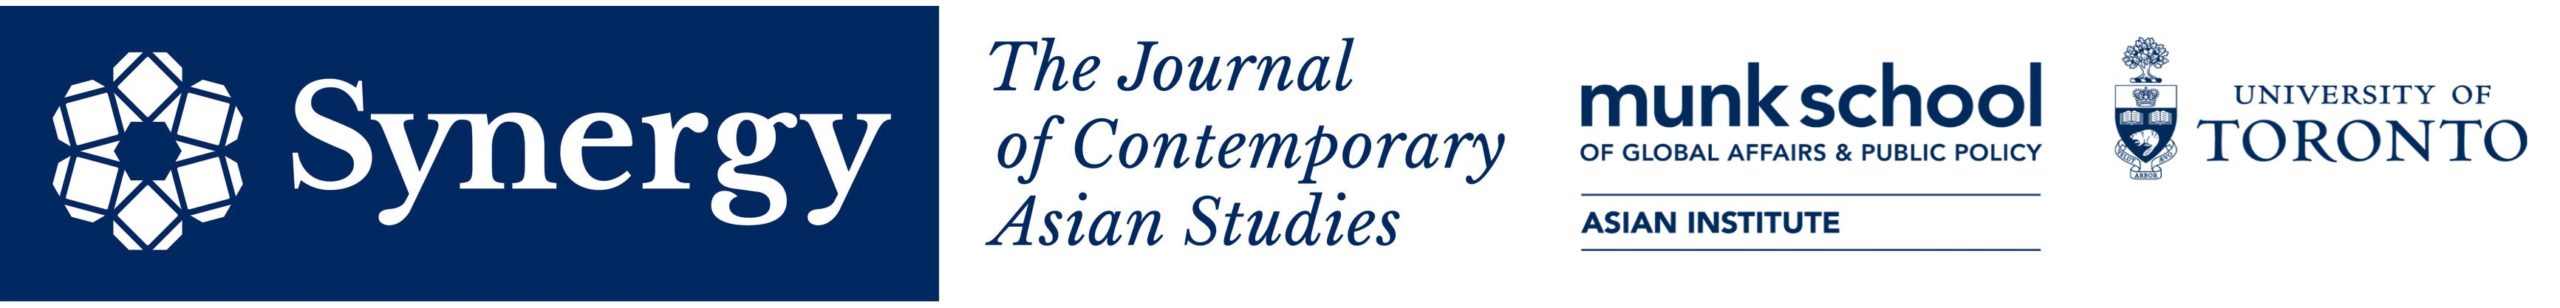 Synergy: The Journal of Contemporary Asian Studies